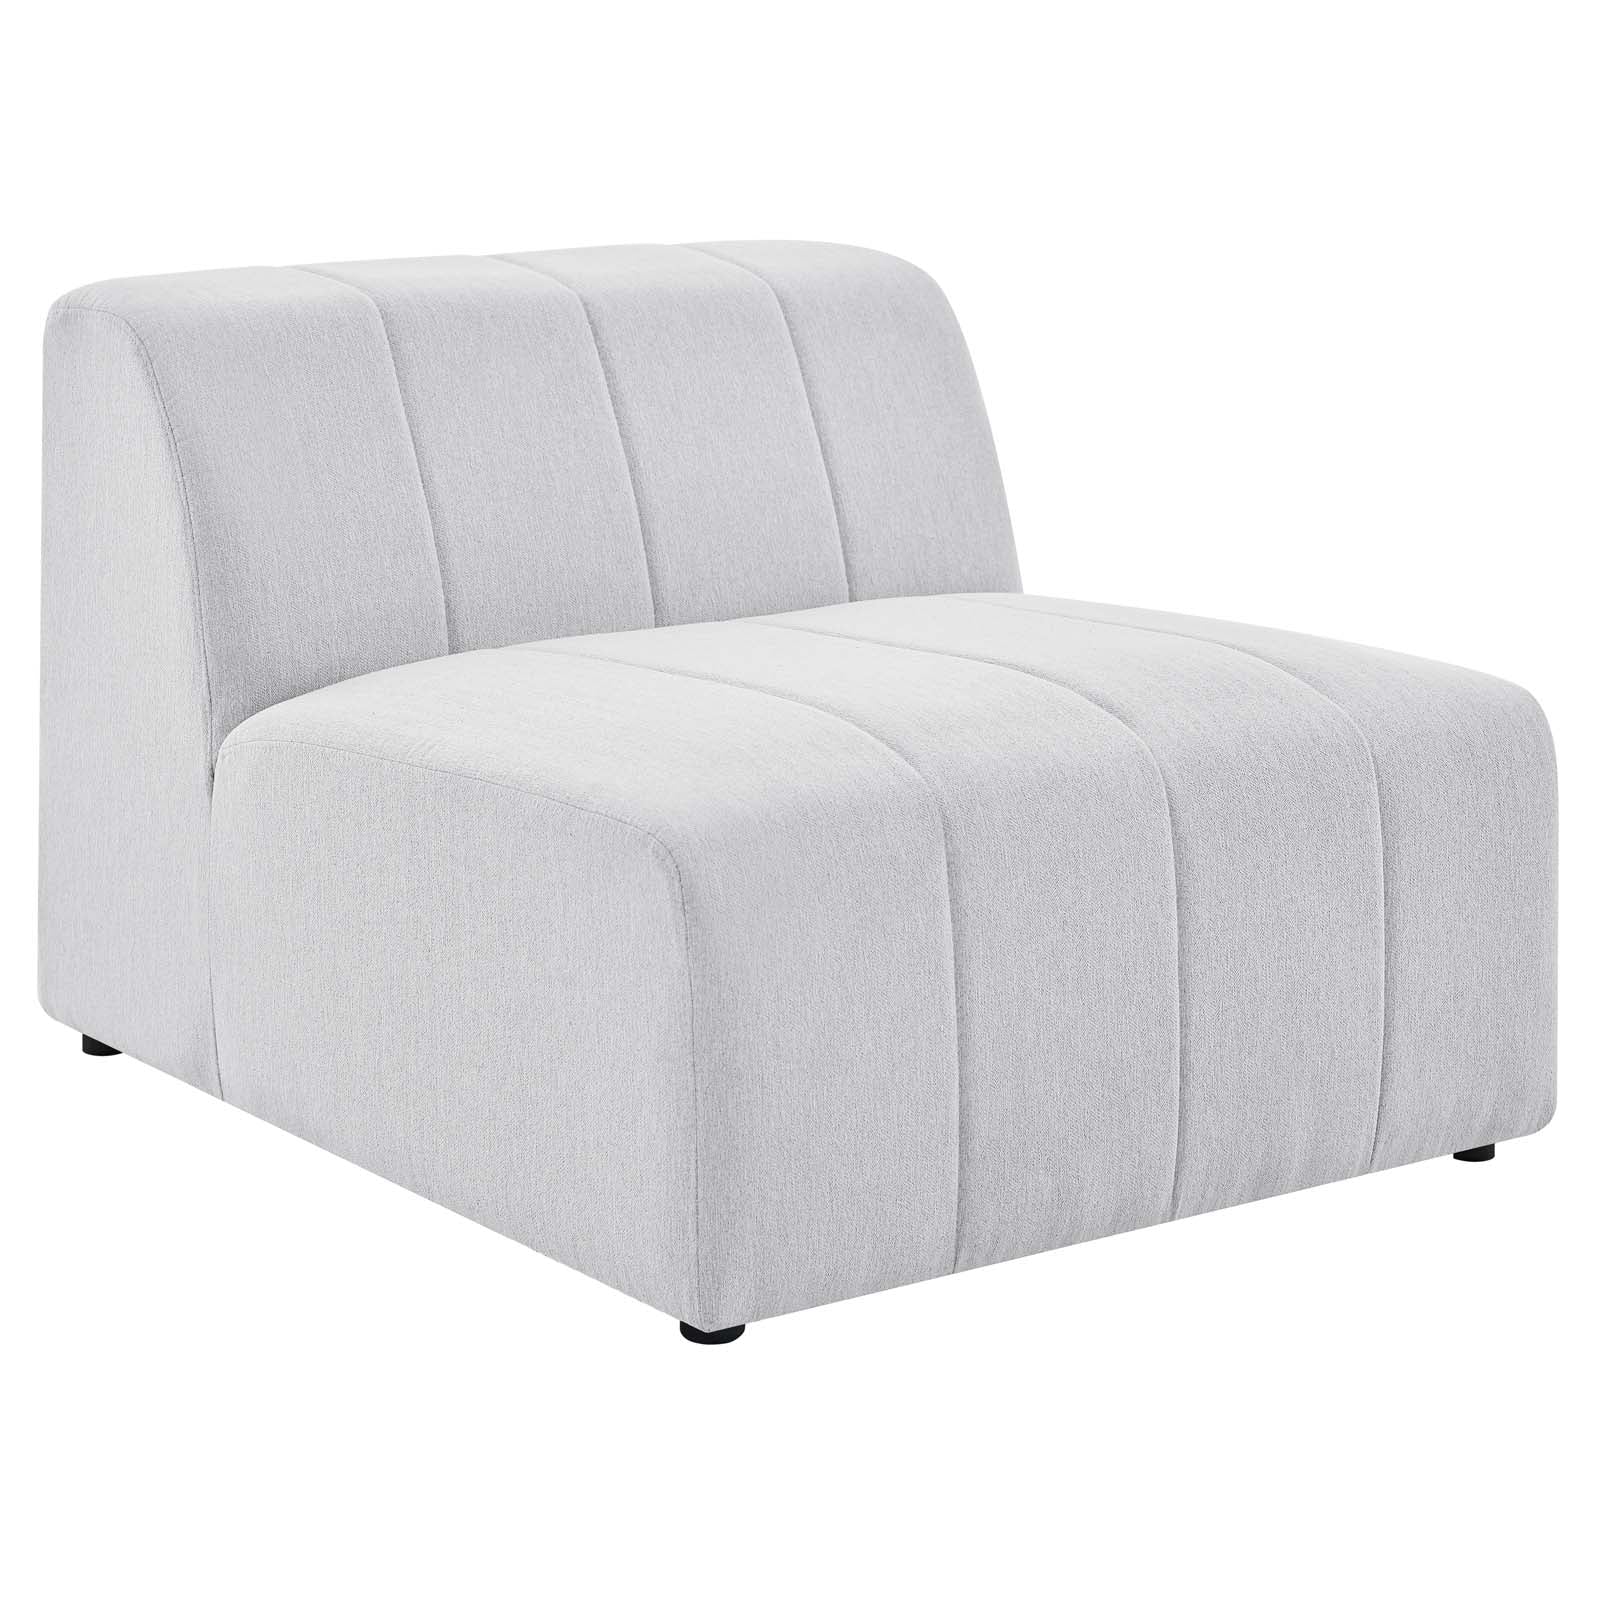 Modway Sectional Sofas - Bartlett Upholstered Fabric 8-Piece Sectional Sofa Ivory